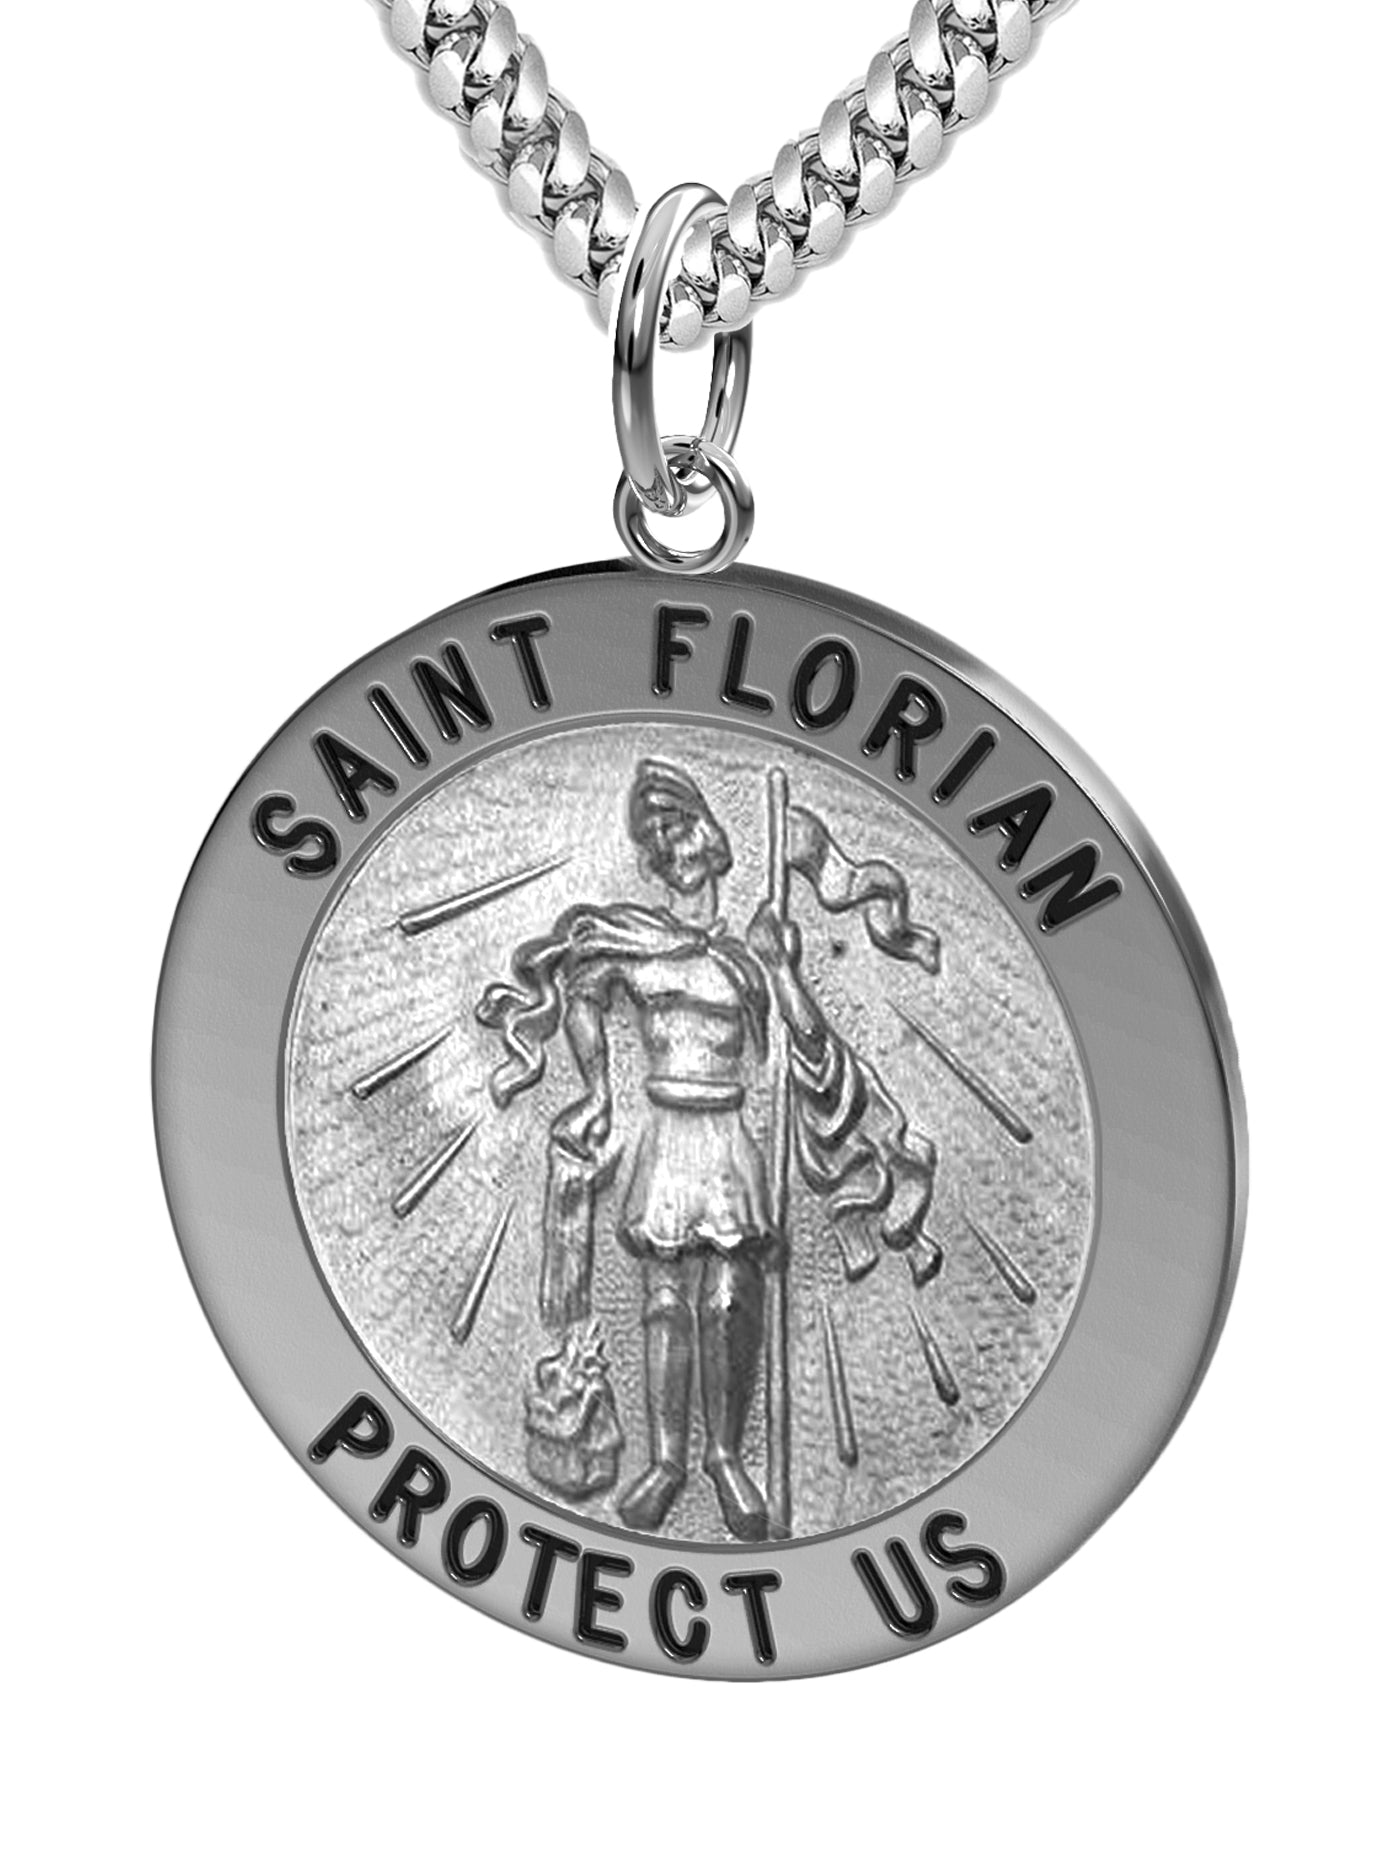 Men's 1.0in 925 Sterling Silver Saint Florian Round Pendant Necklace, Antique Finish - US Jewels